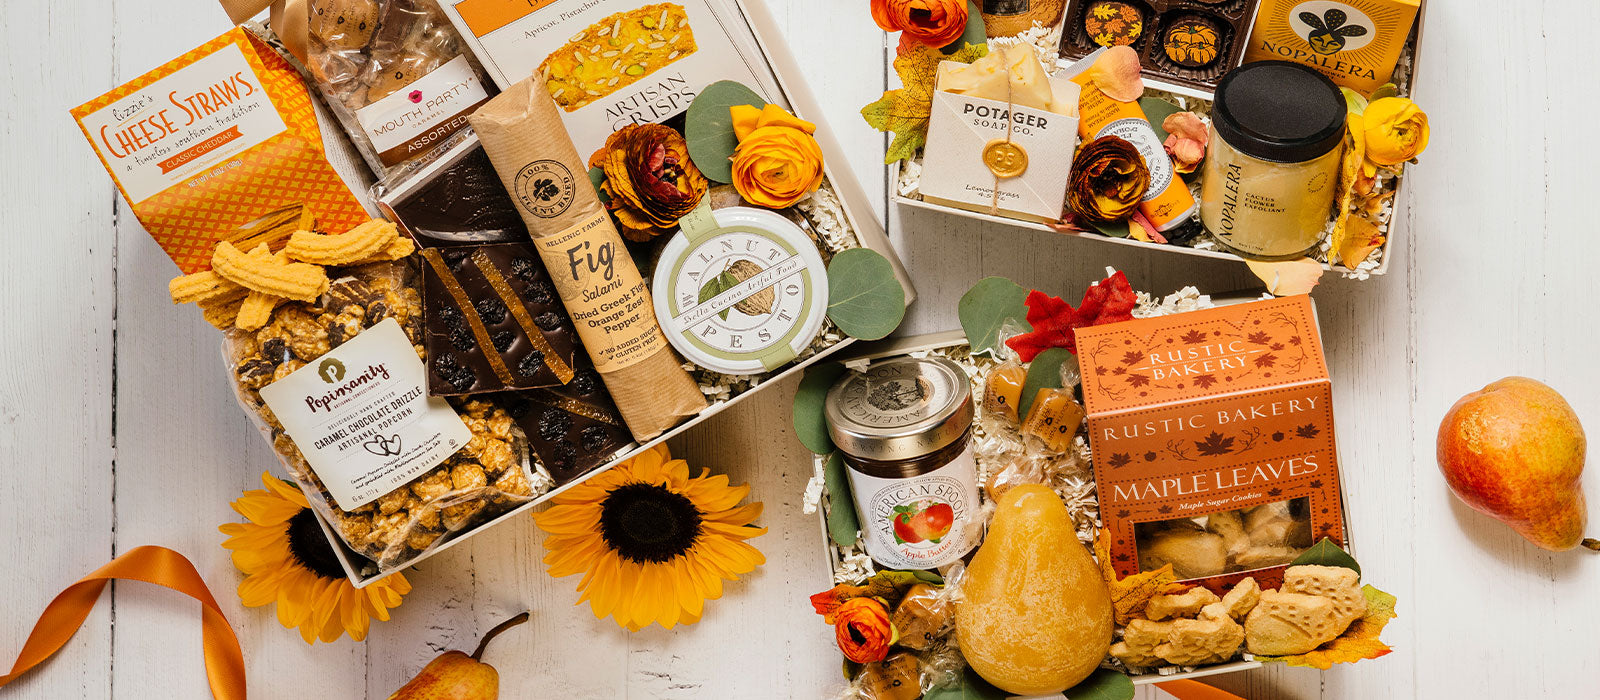 Send a gift to someone special - our sister store ekuBOX specializes in gift boxes for every occasion.